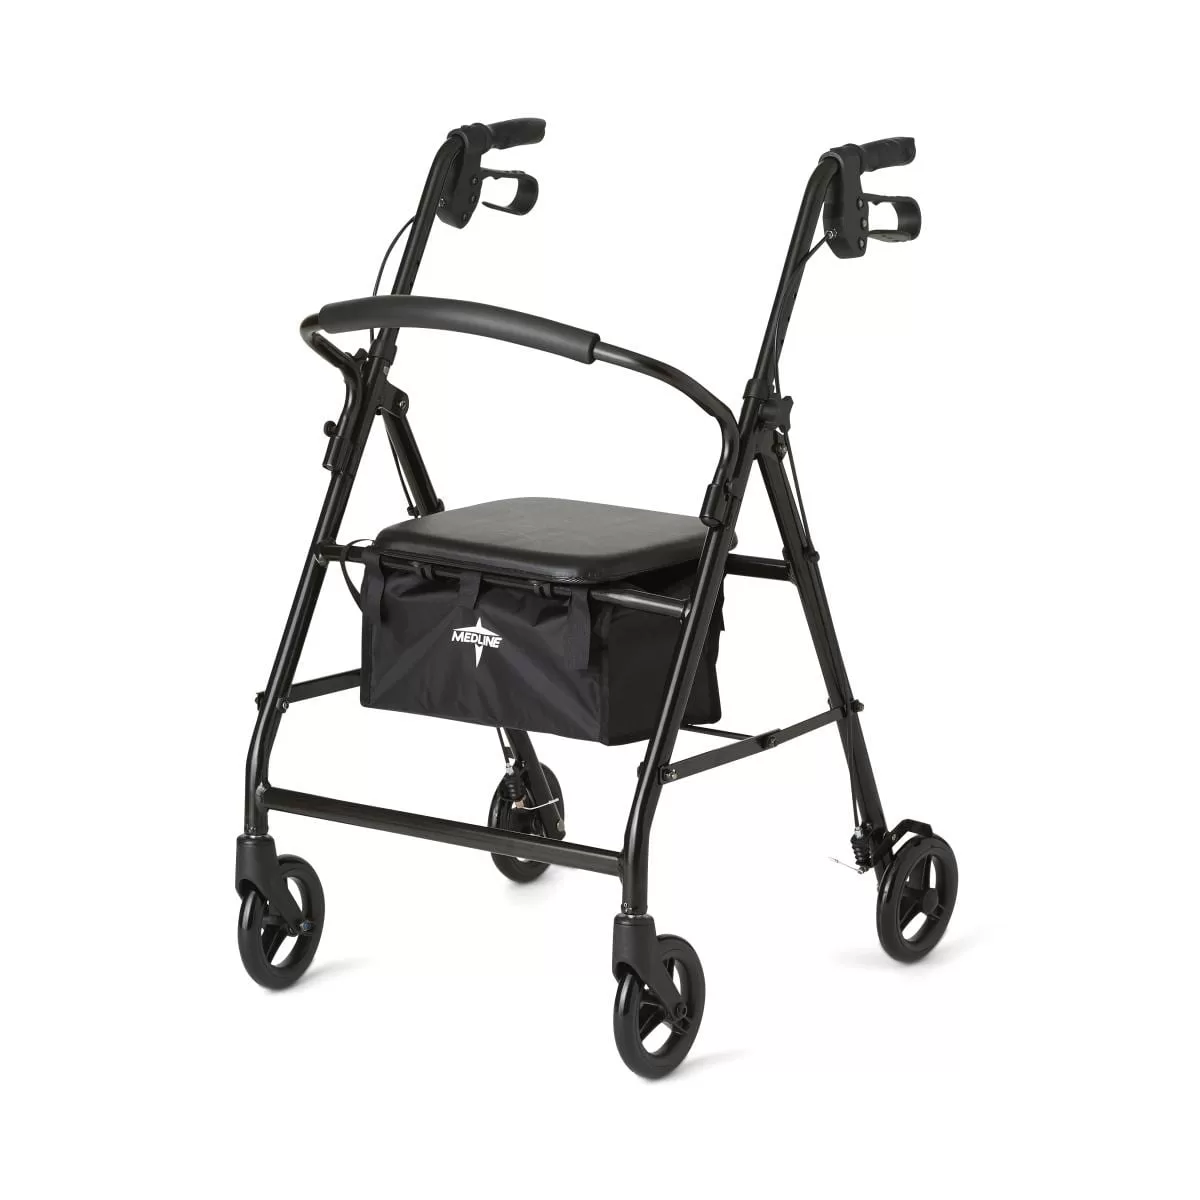 lightweight, foldable rolling walker with hand brakes and seat for obese people